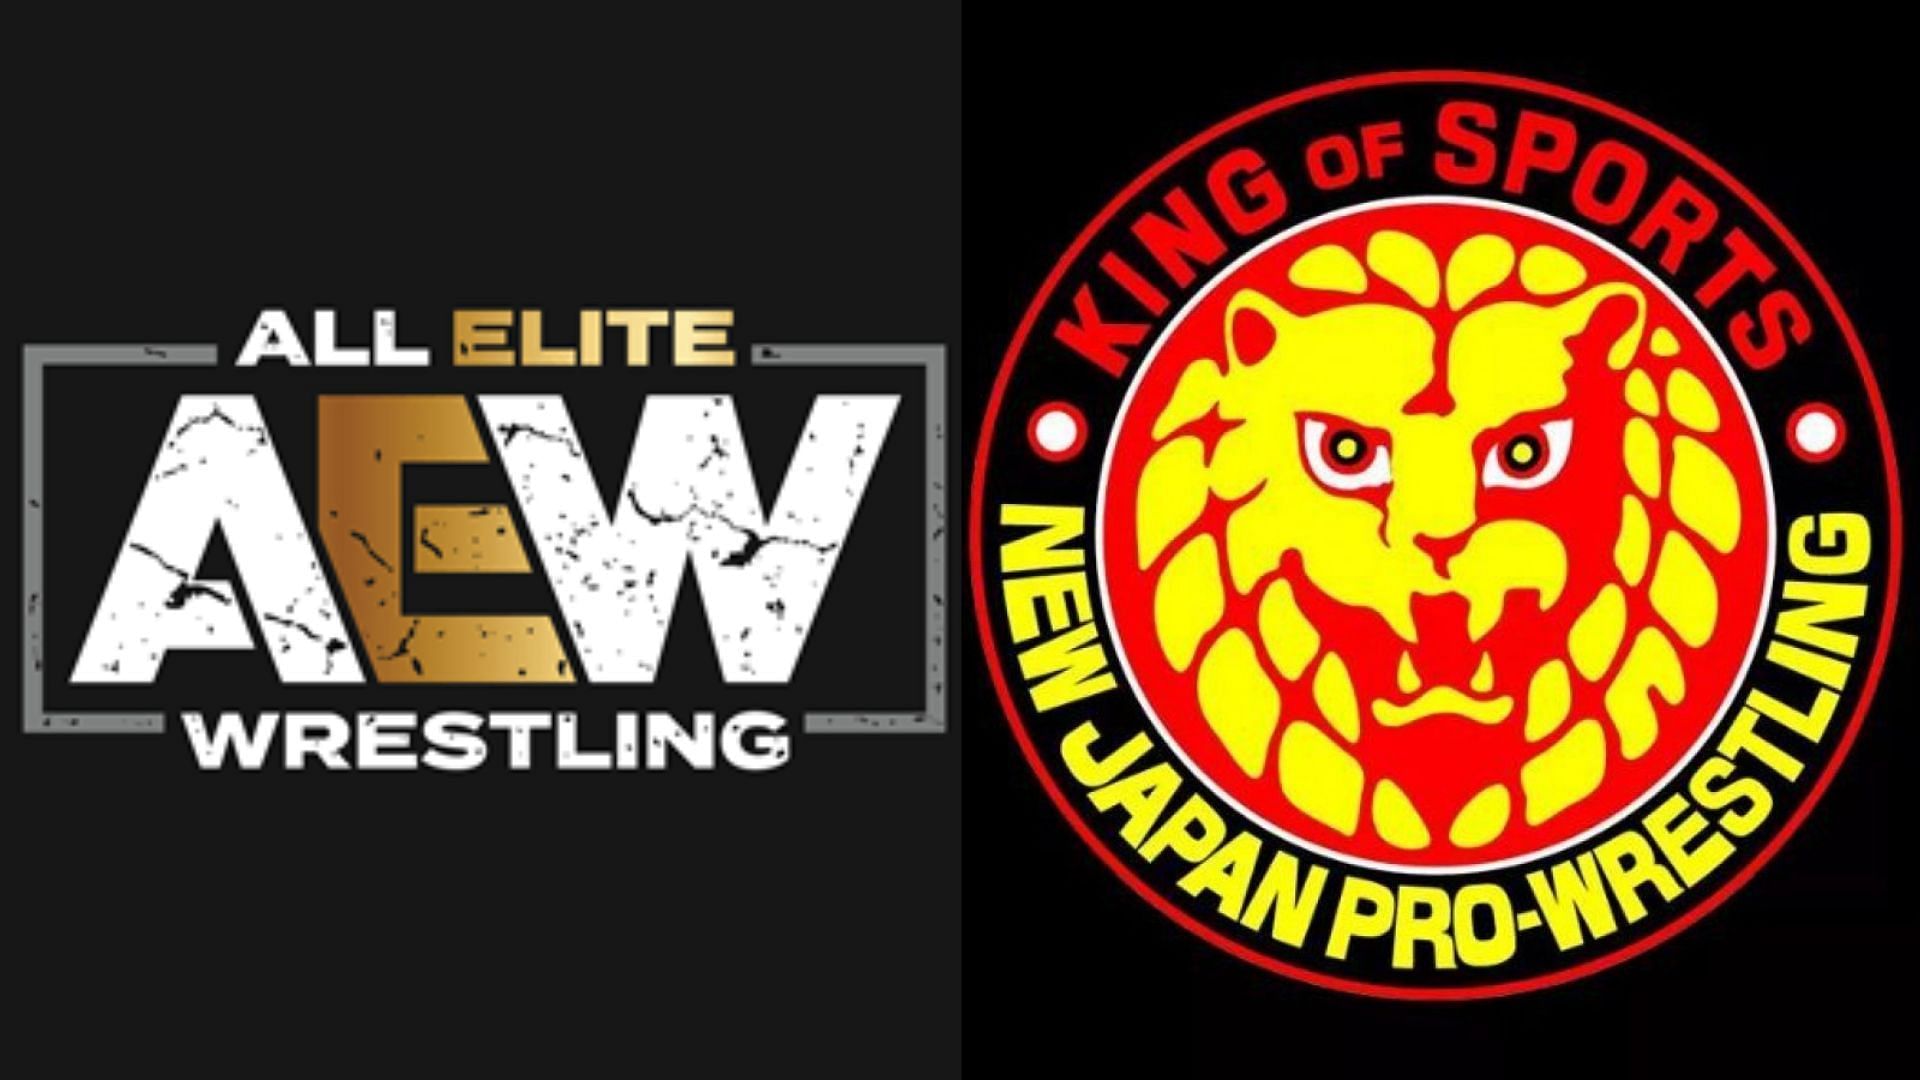 Is the former IWPG United States Champion coming back to AEW?